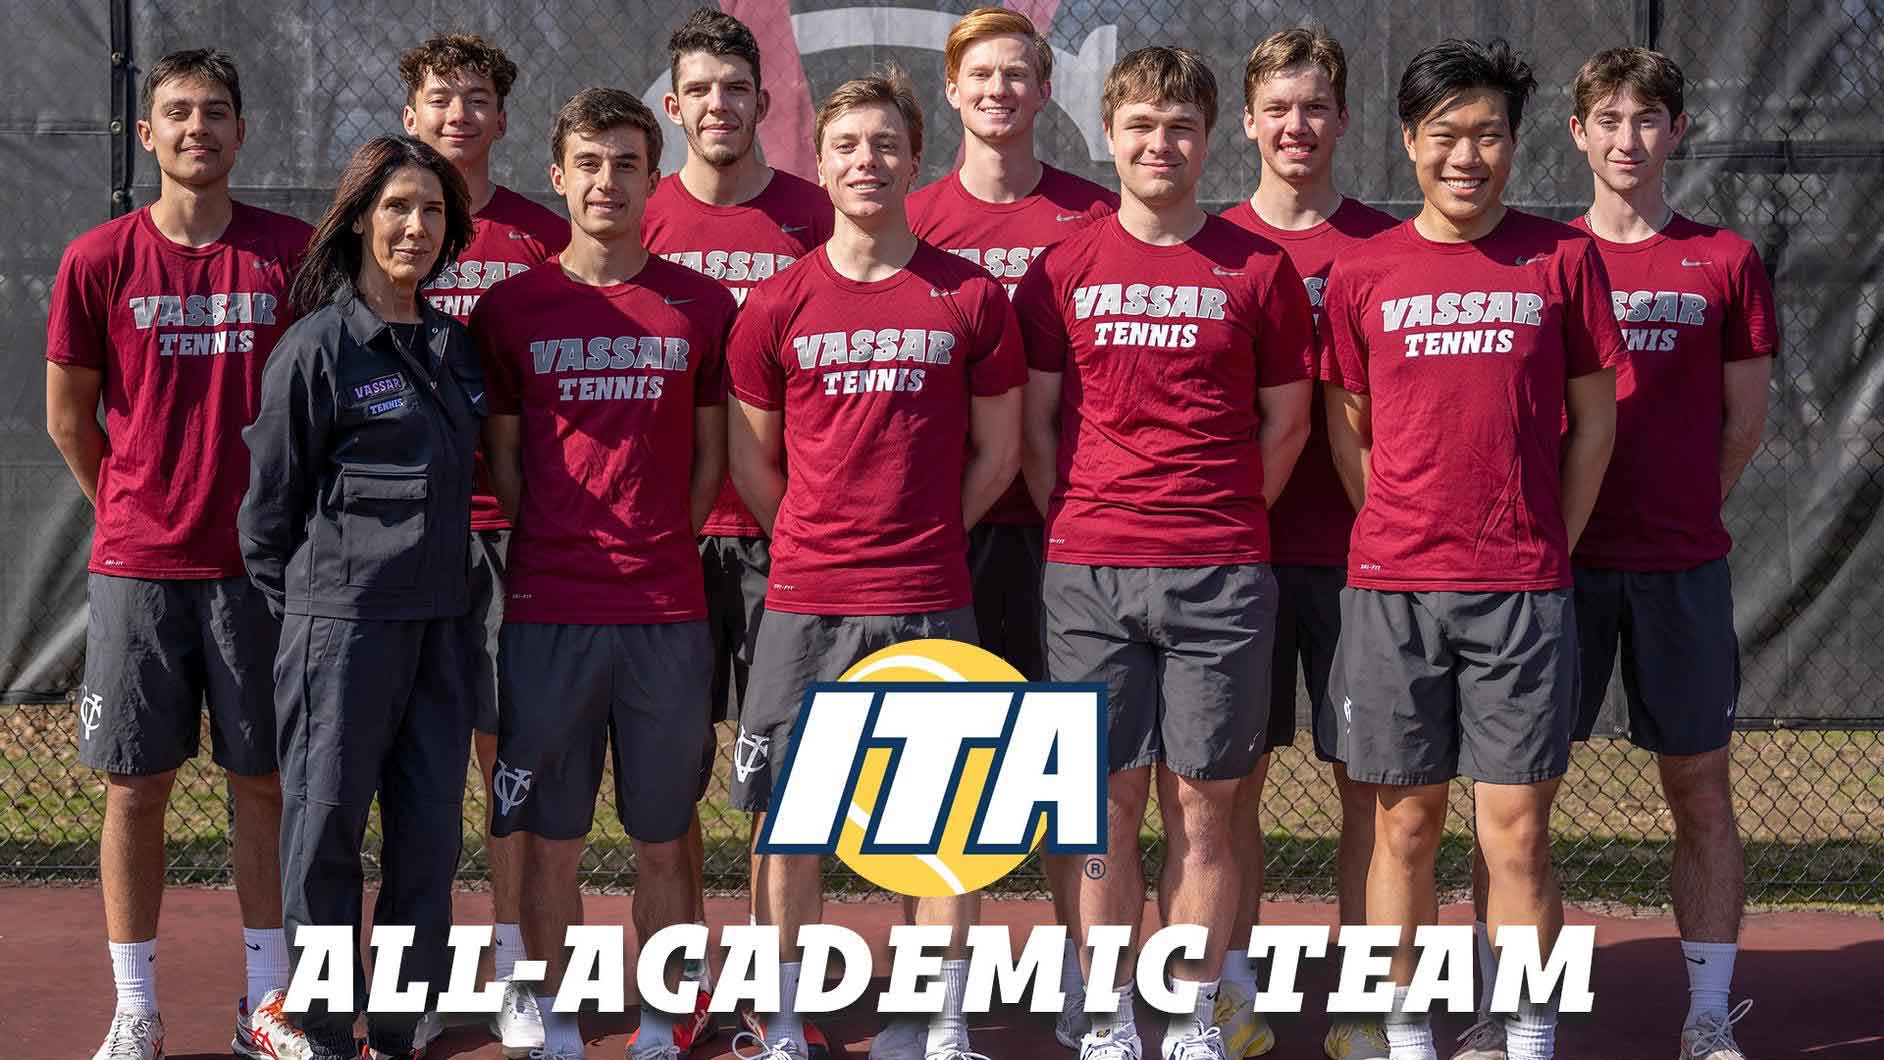 Student athletes and a coach pose for the camera with white text over the image that reads: ITA all-academic team